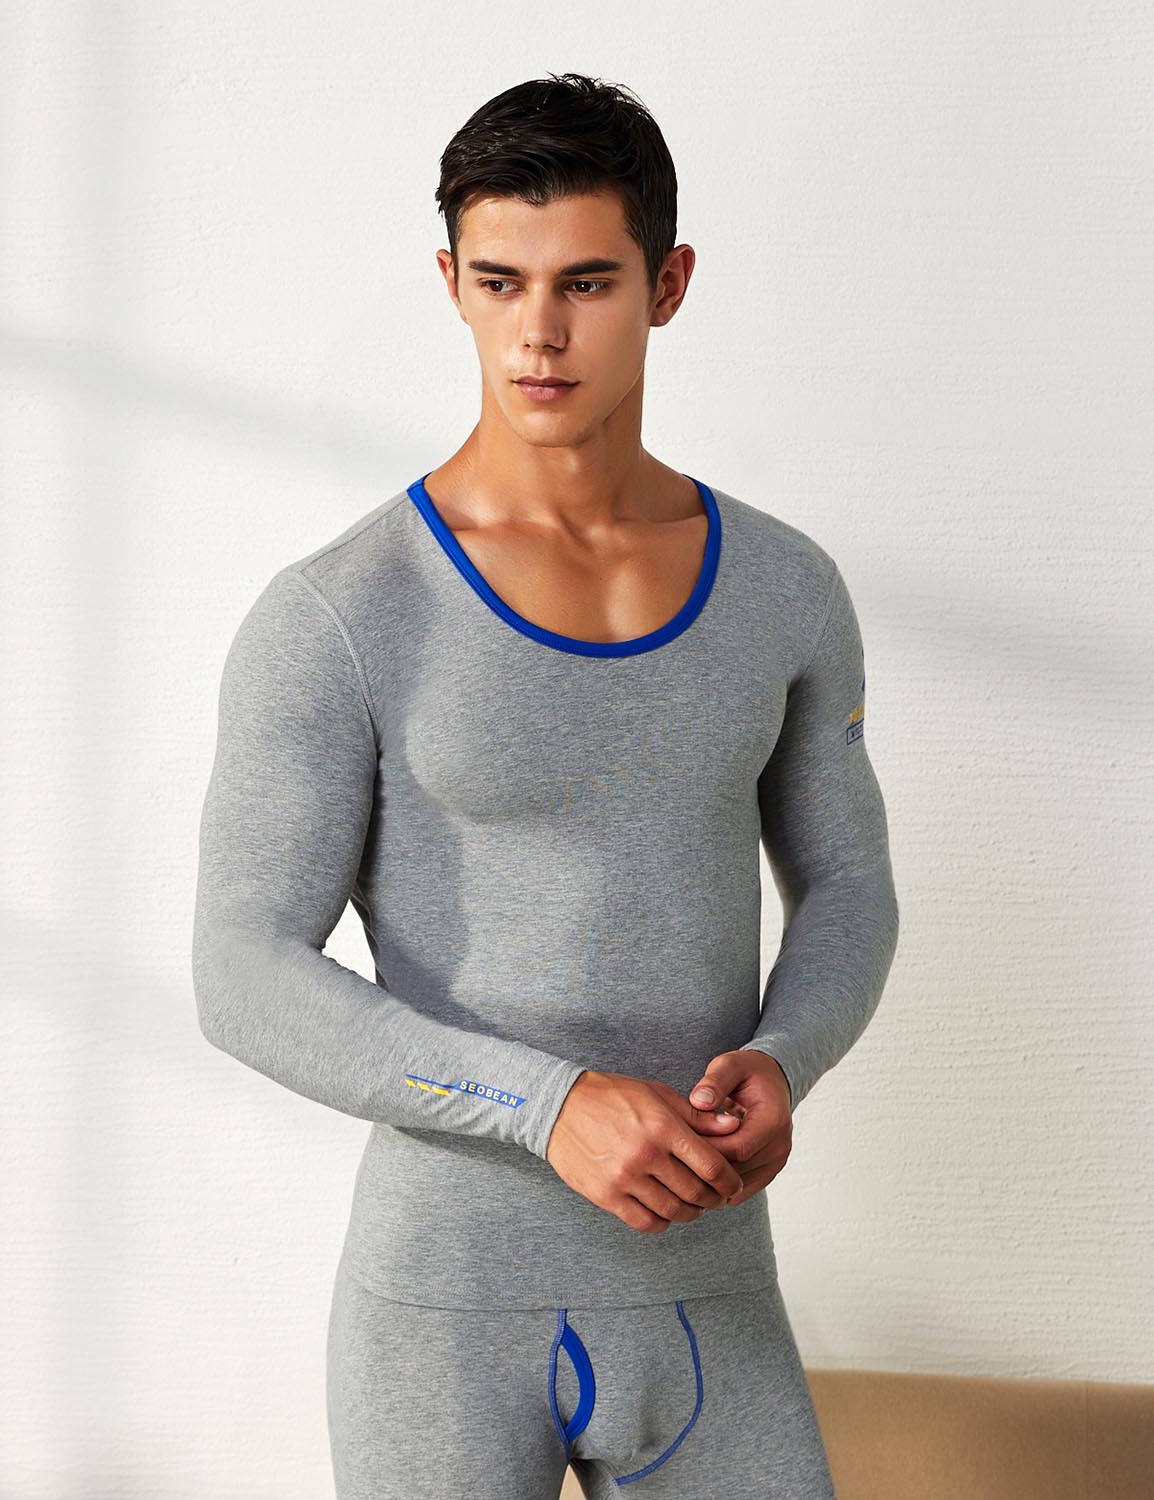 Thermal Crew Neck Baselayer Long Sleeve Tops 81201